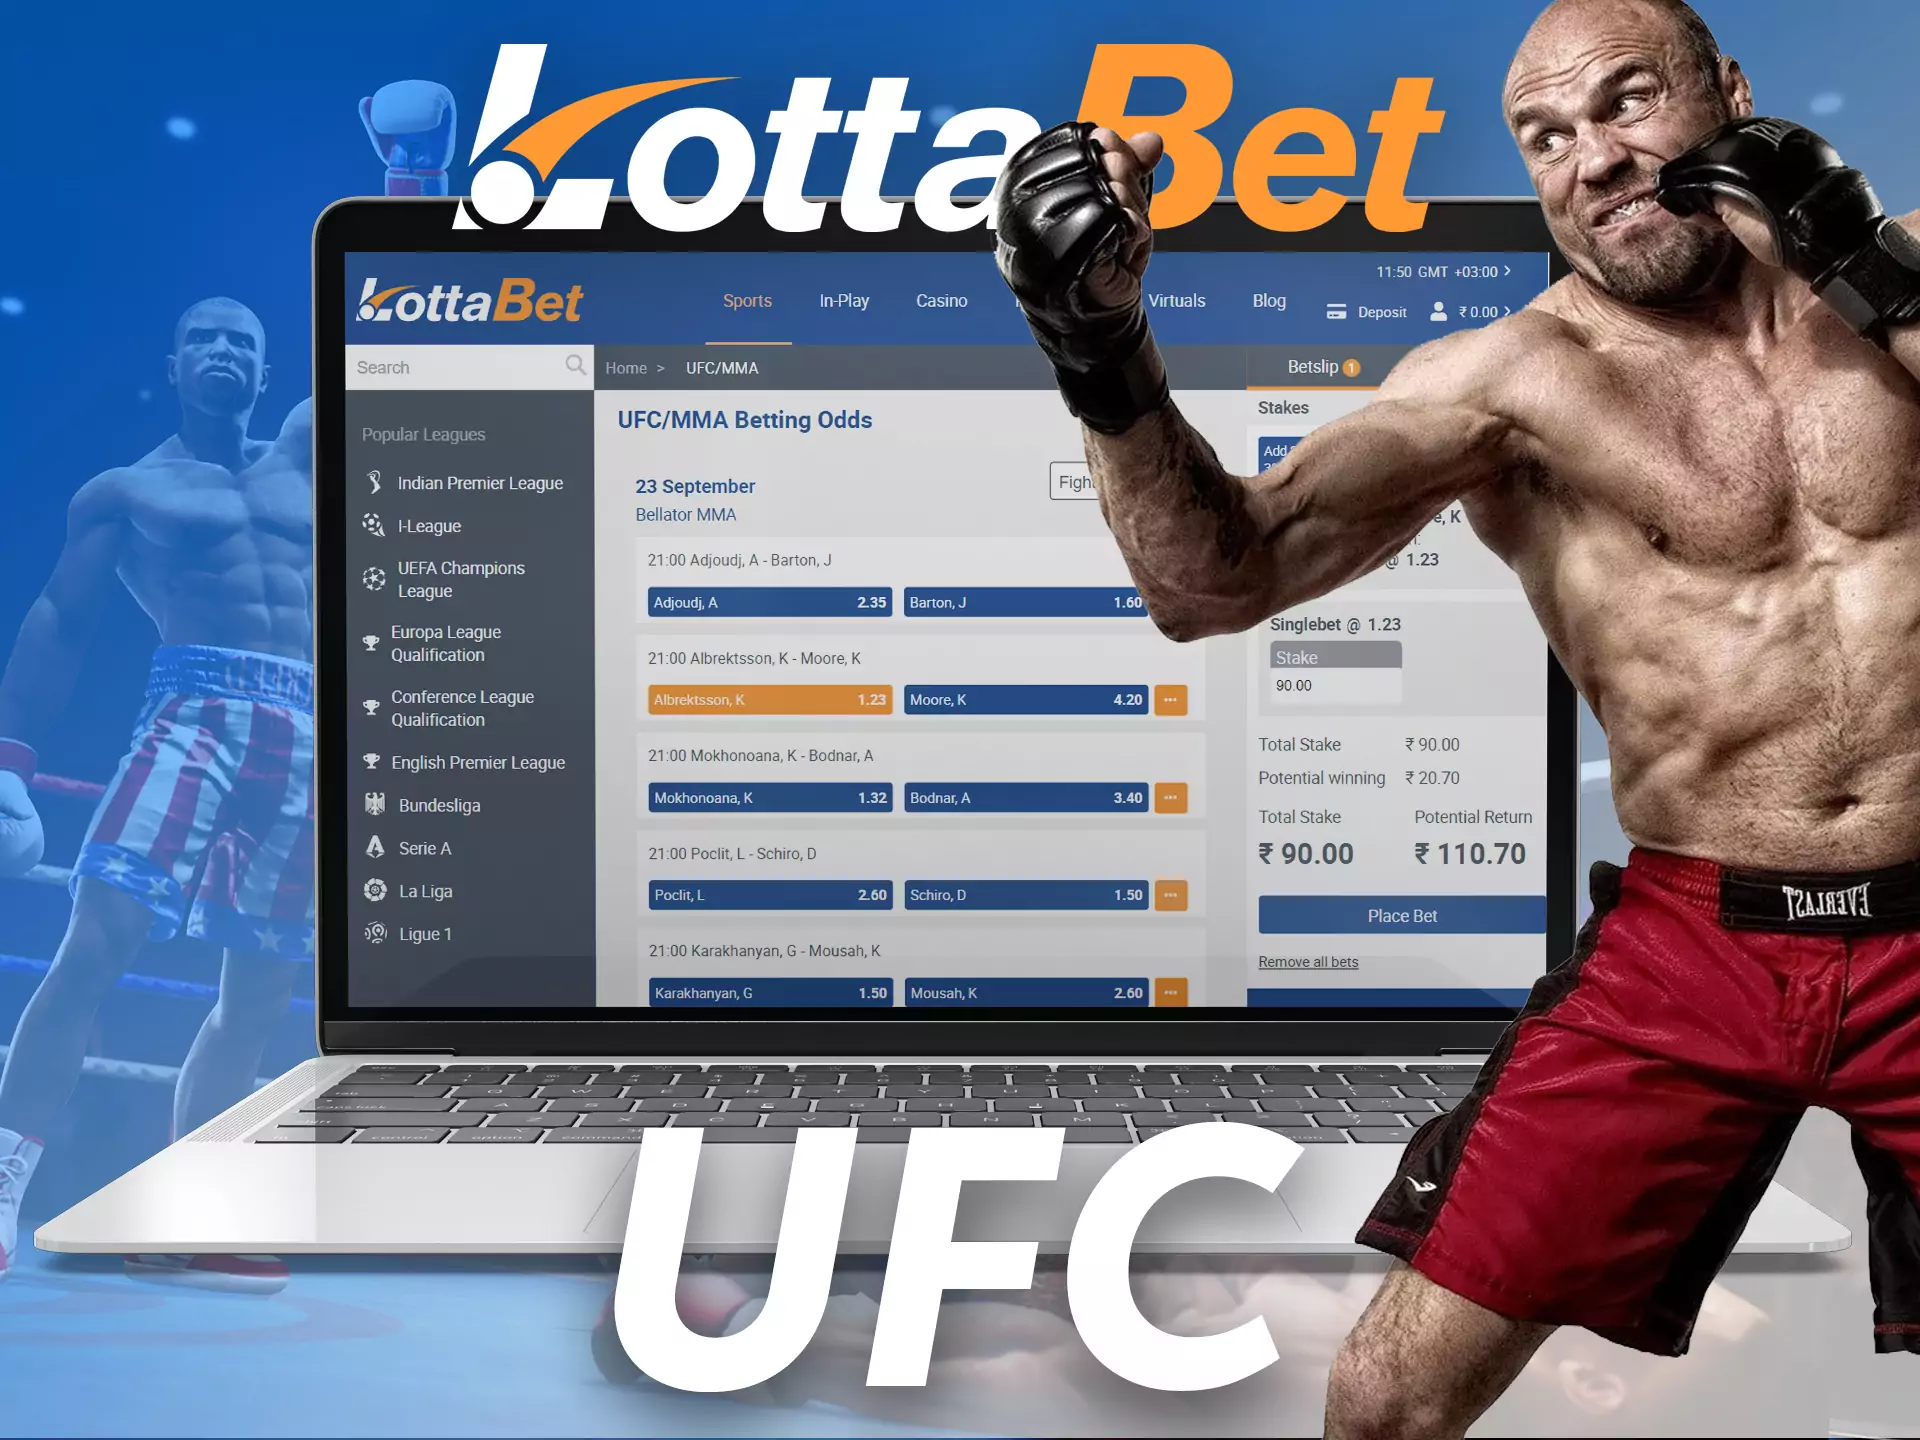 In the Lottabet sportsbook, you find the UFC fights available for betting.